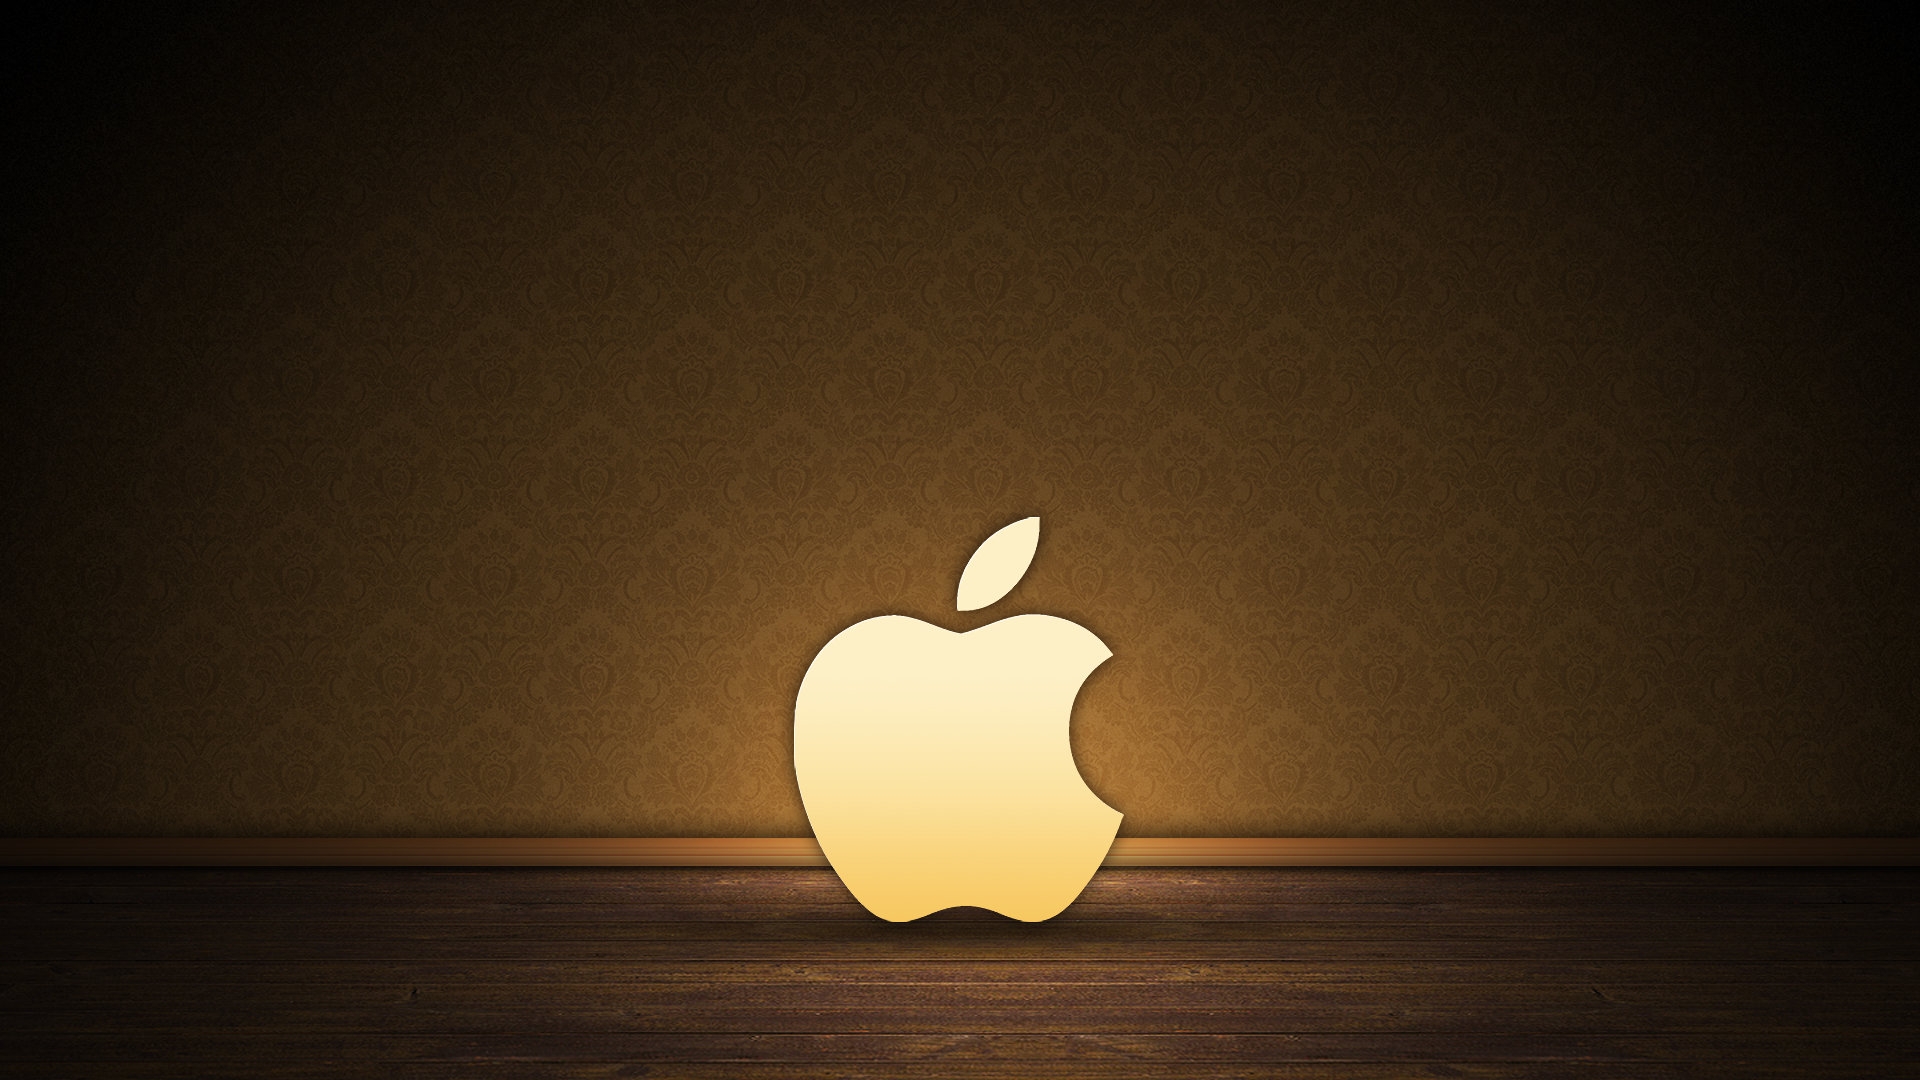 Brown Apple logo   High Definition Wallpapers   HD wallpapers